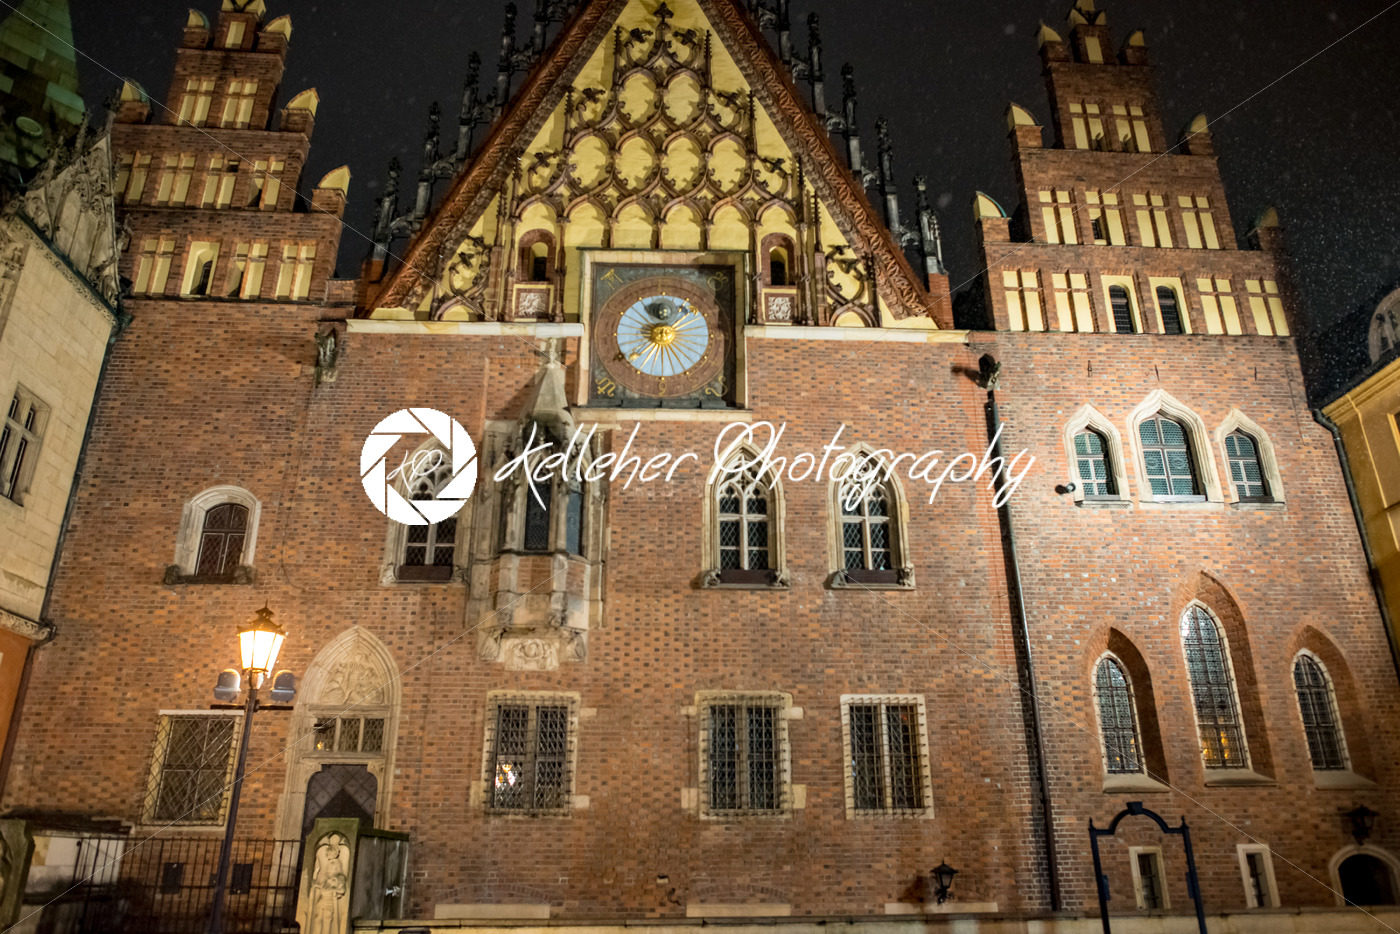 Wroclaw, Poland – March 6, 2018: Wroclaw Town Hall at night in historic capital of Silesia, Poland, Europe. - Kelleher Photography Store